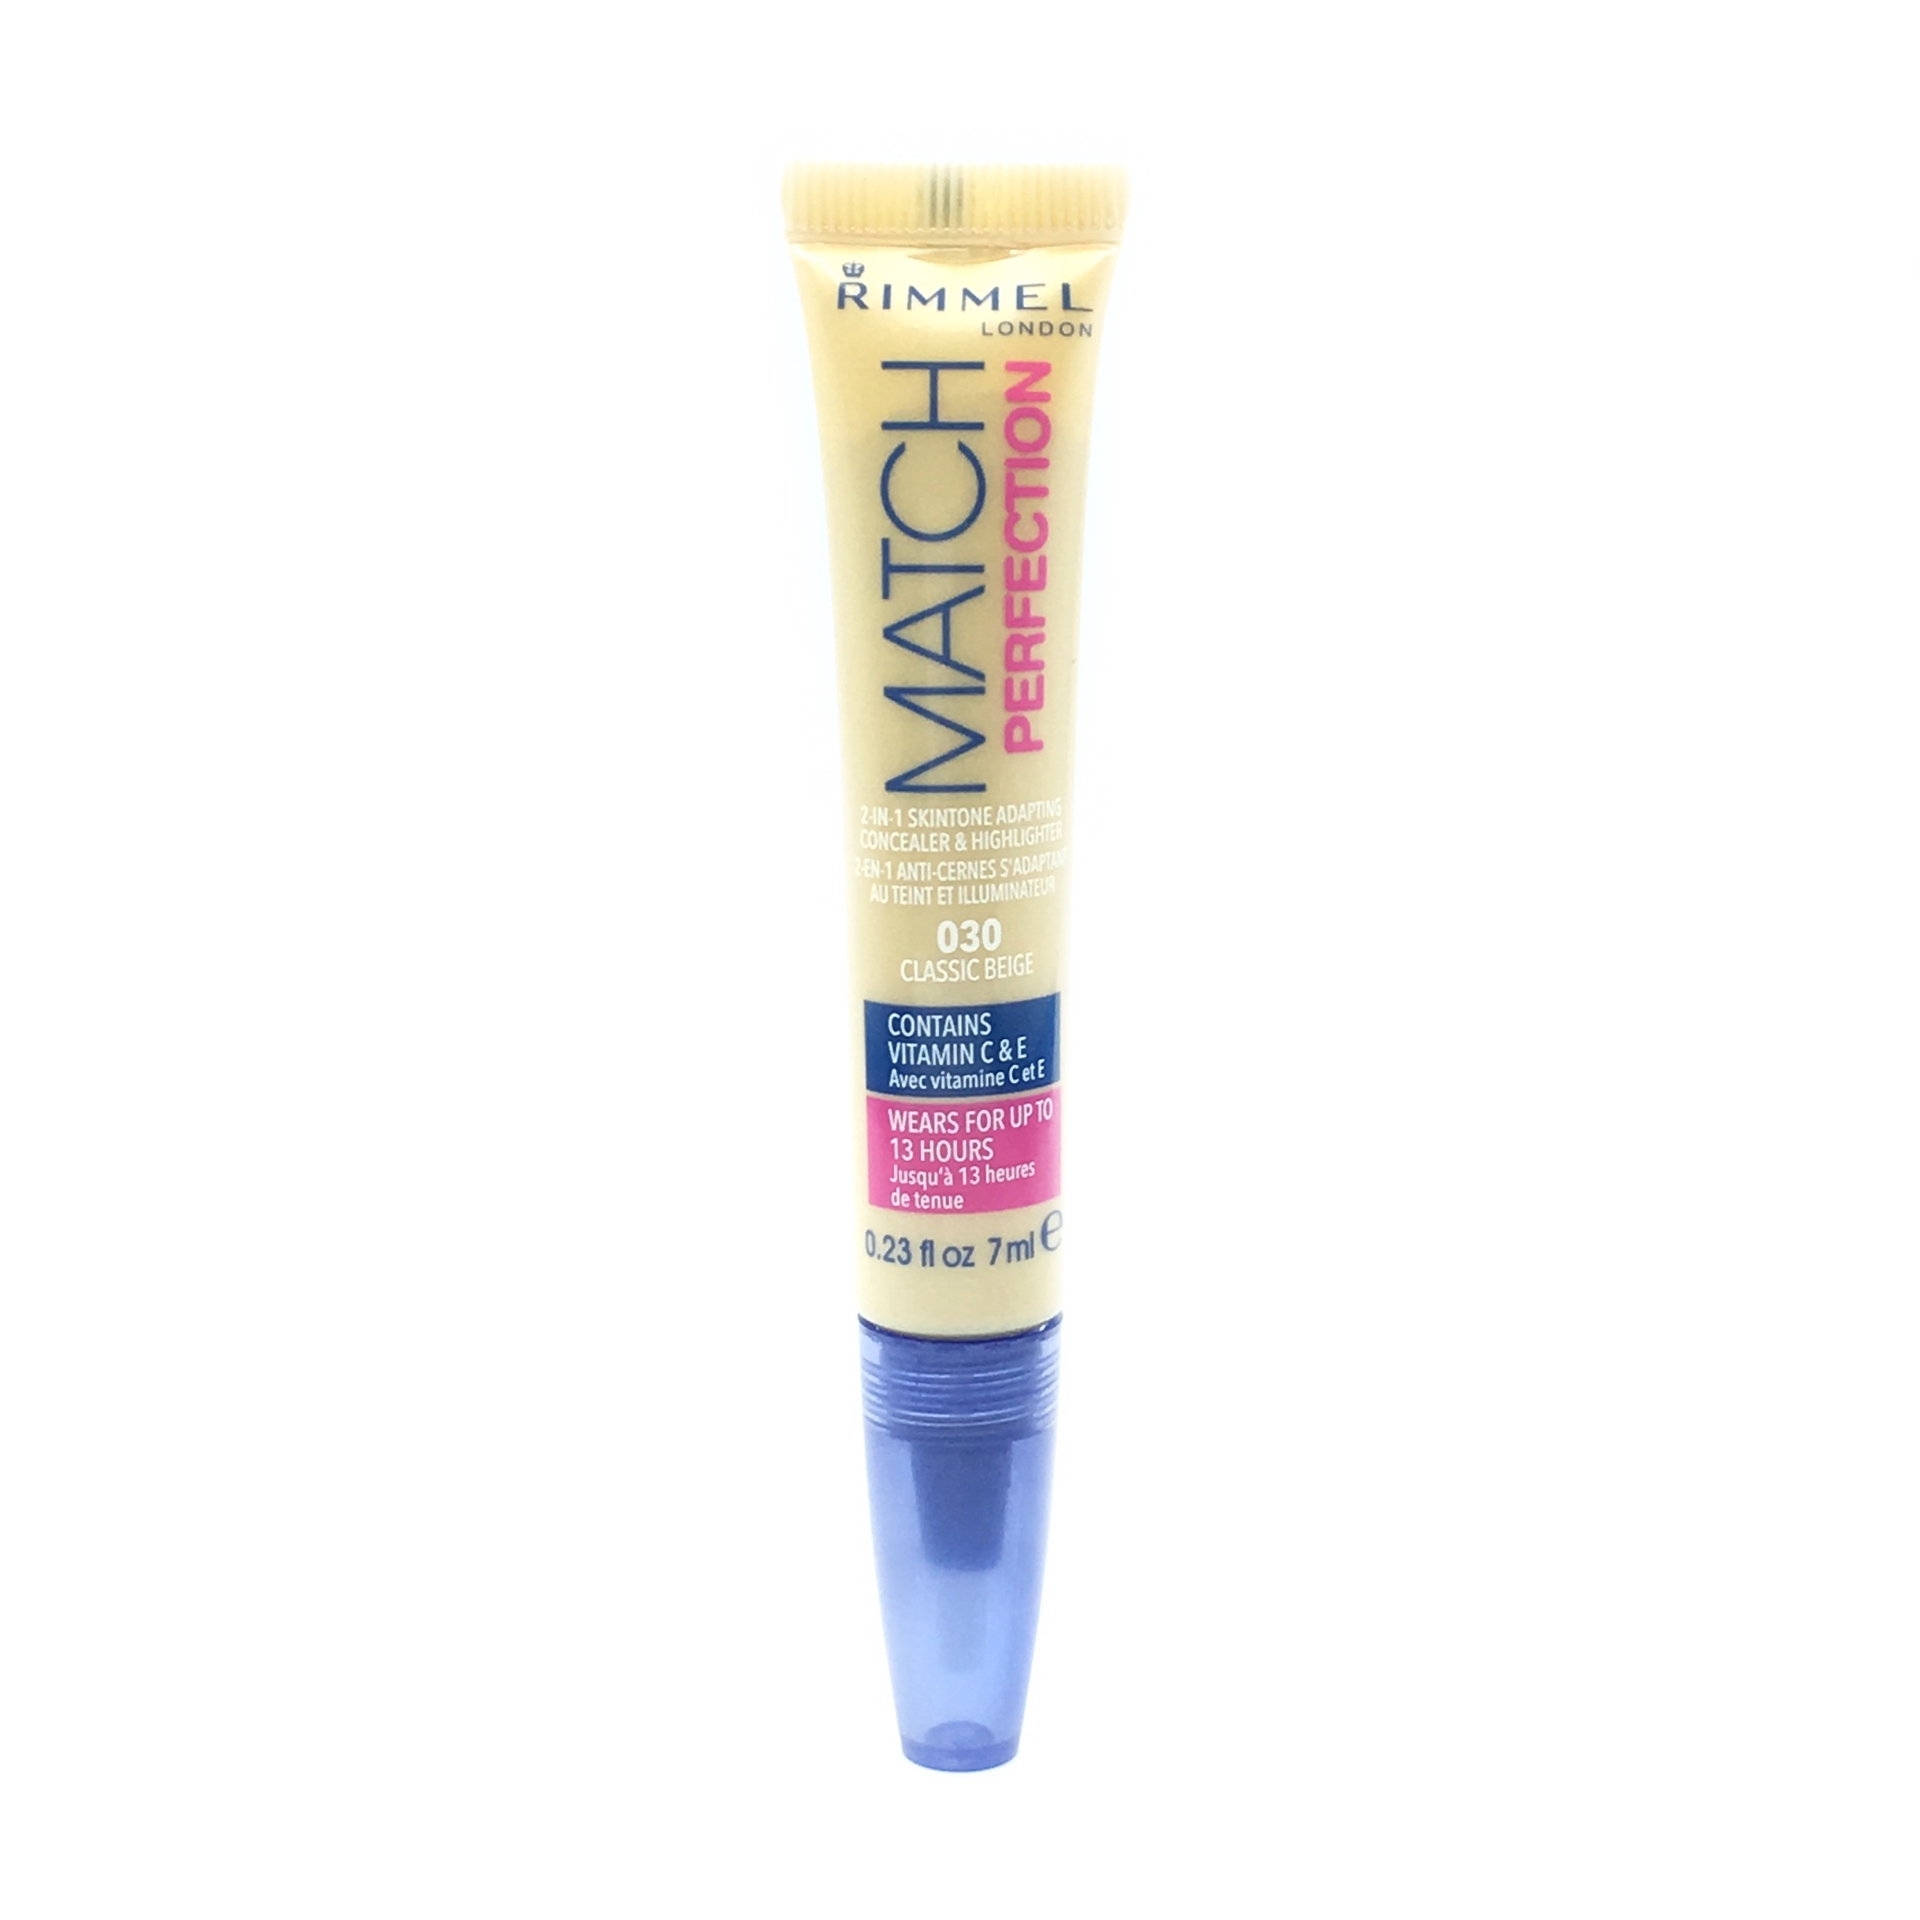 Rimmel Match Perfetion 2-in-1 Skintone Adapting Concealer Faces